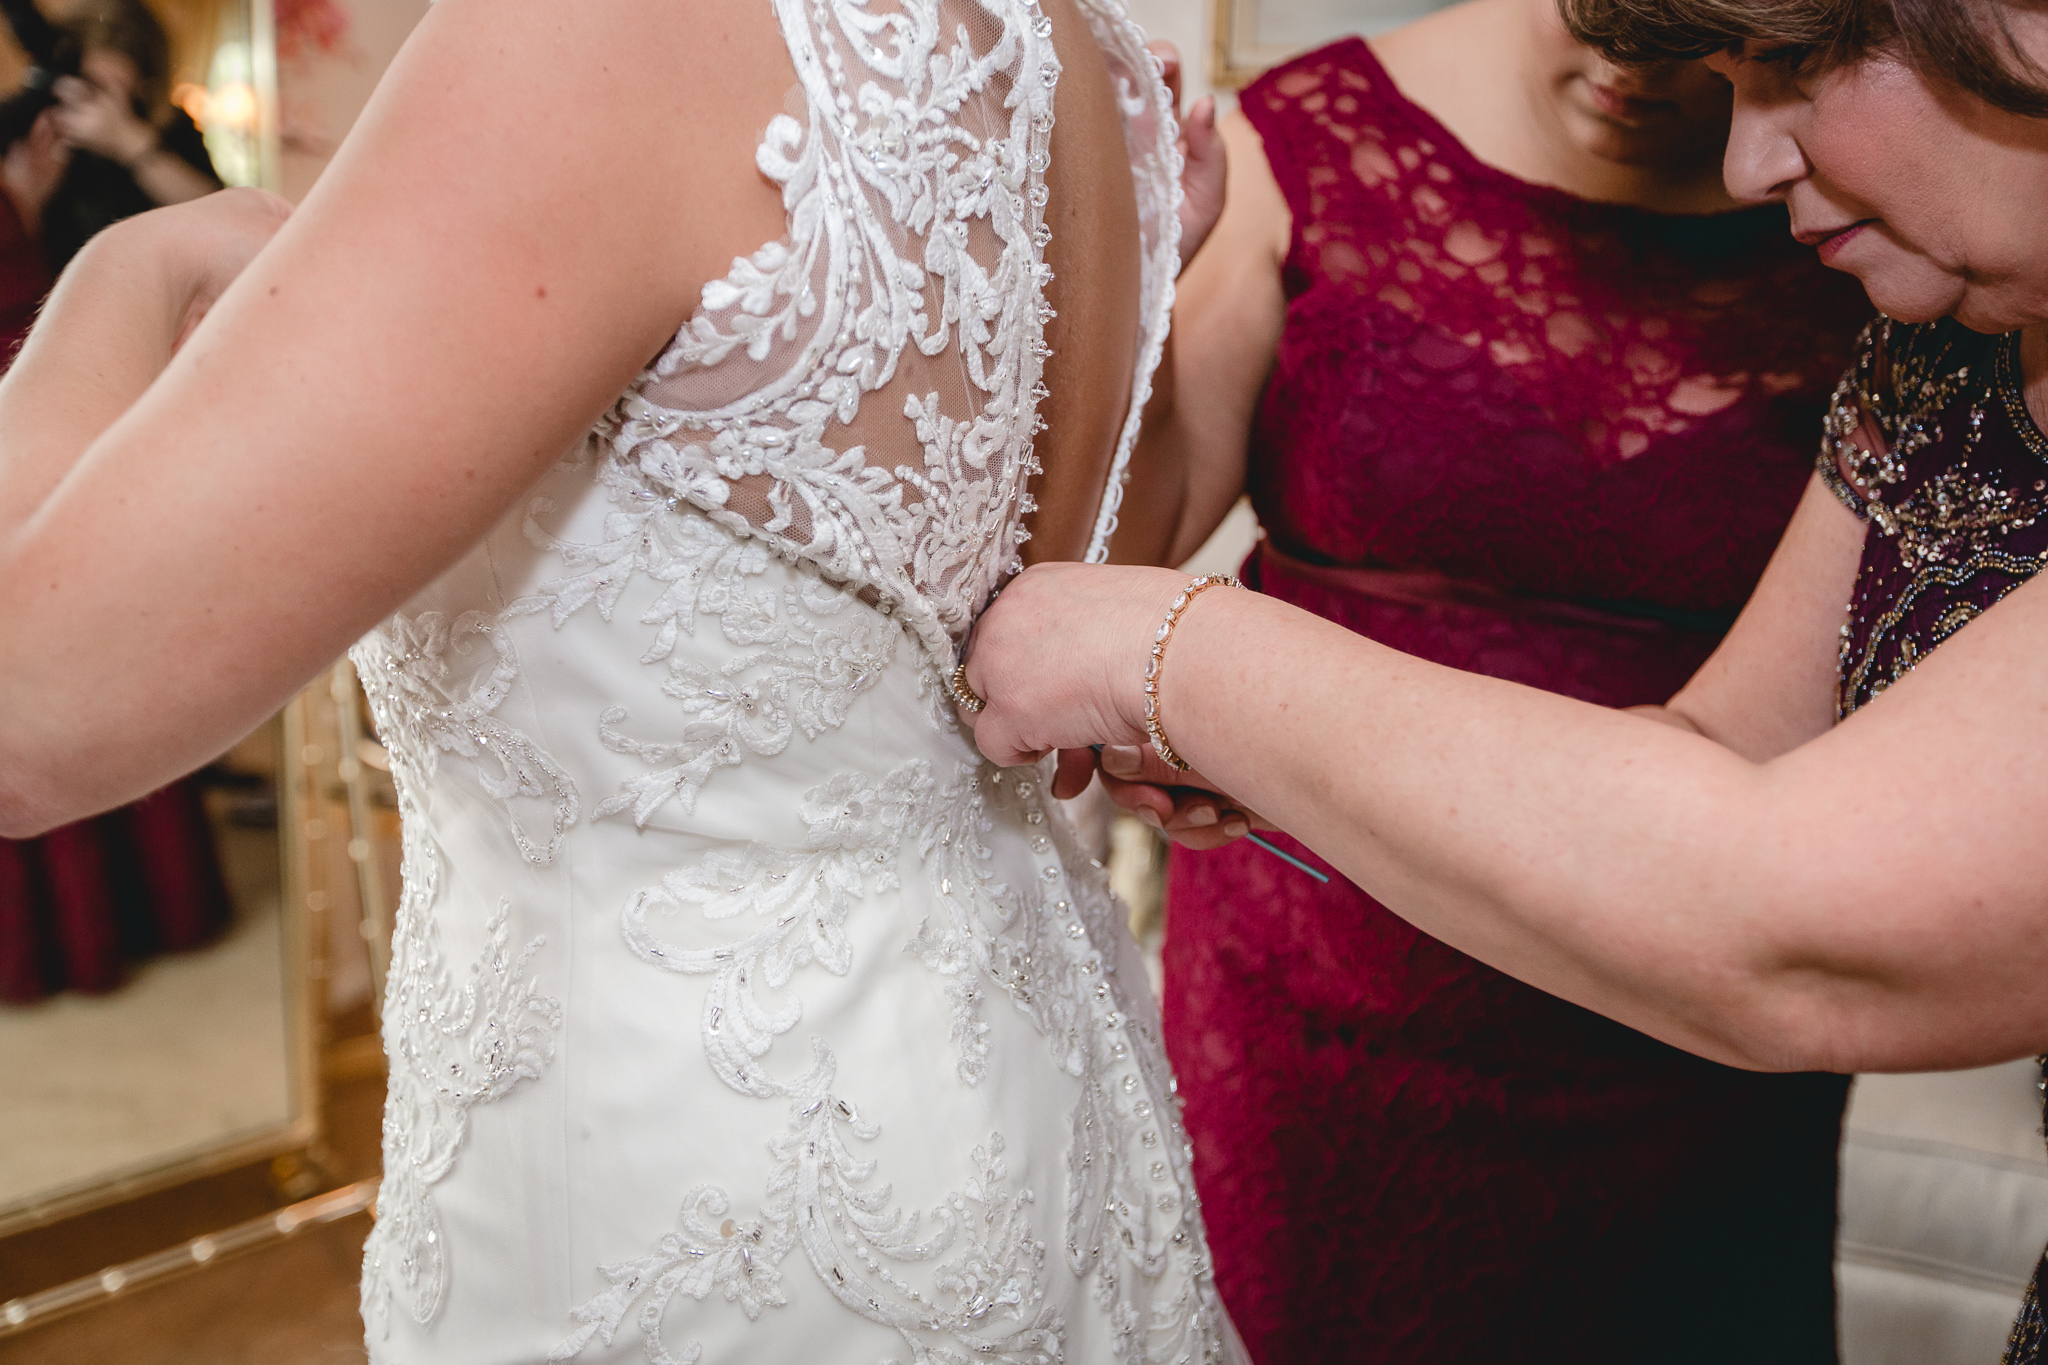 Mother of the bride zips the bride's vintage style wedding dress